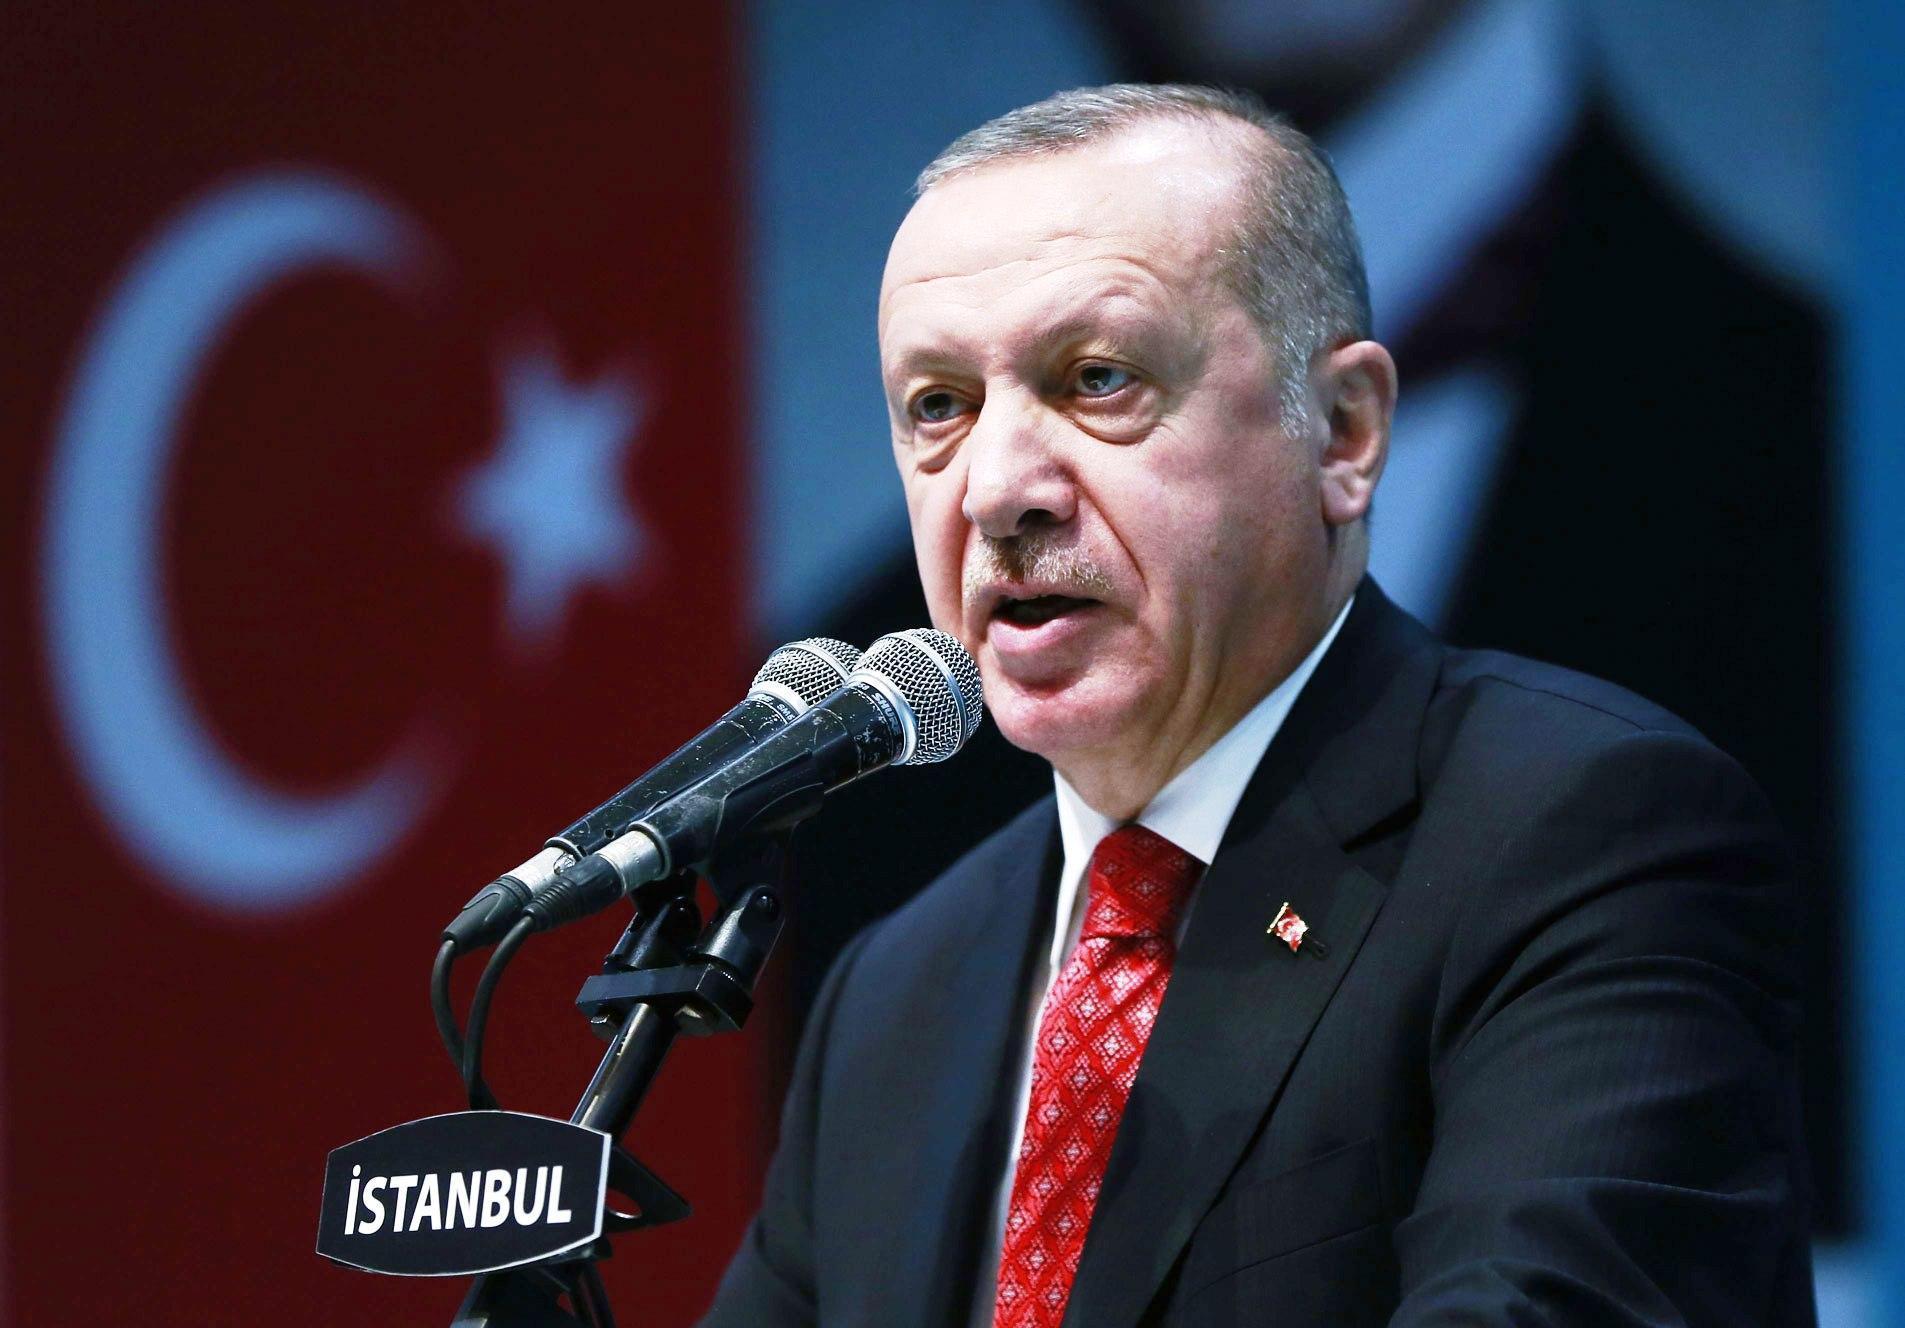 Turkey had a low rate of conviction for terrorism financing, the report said